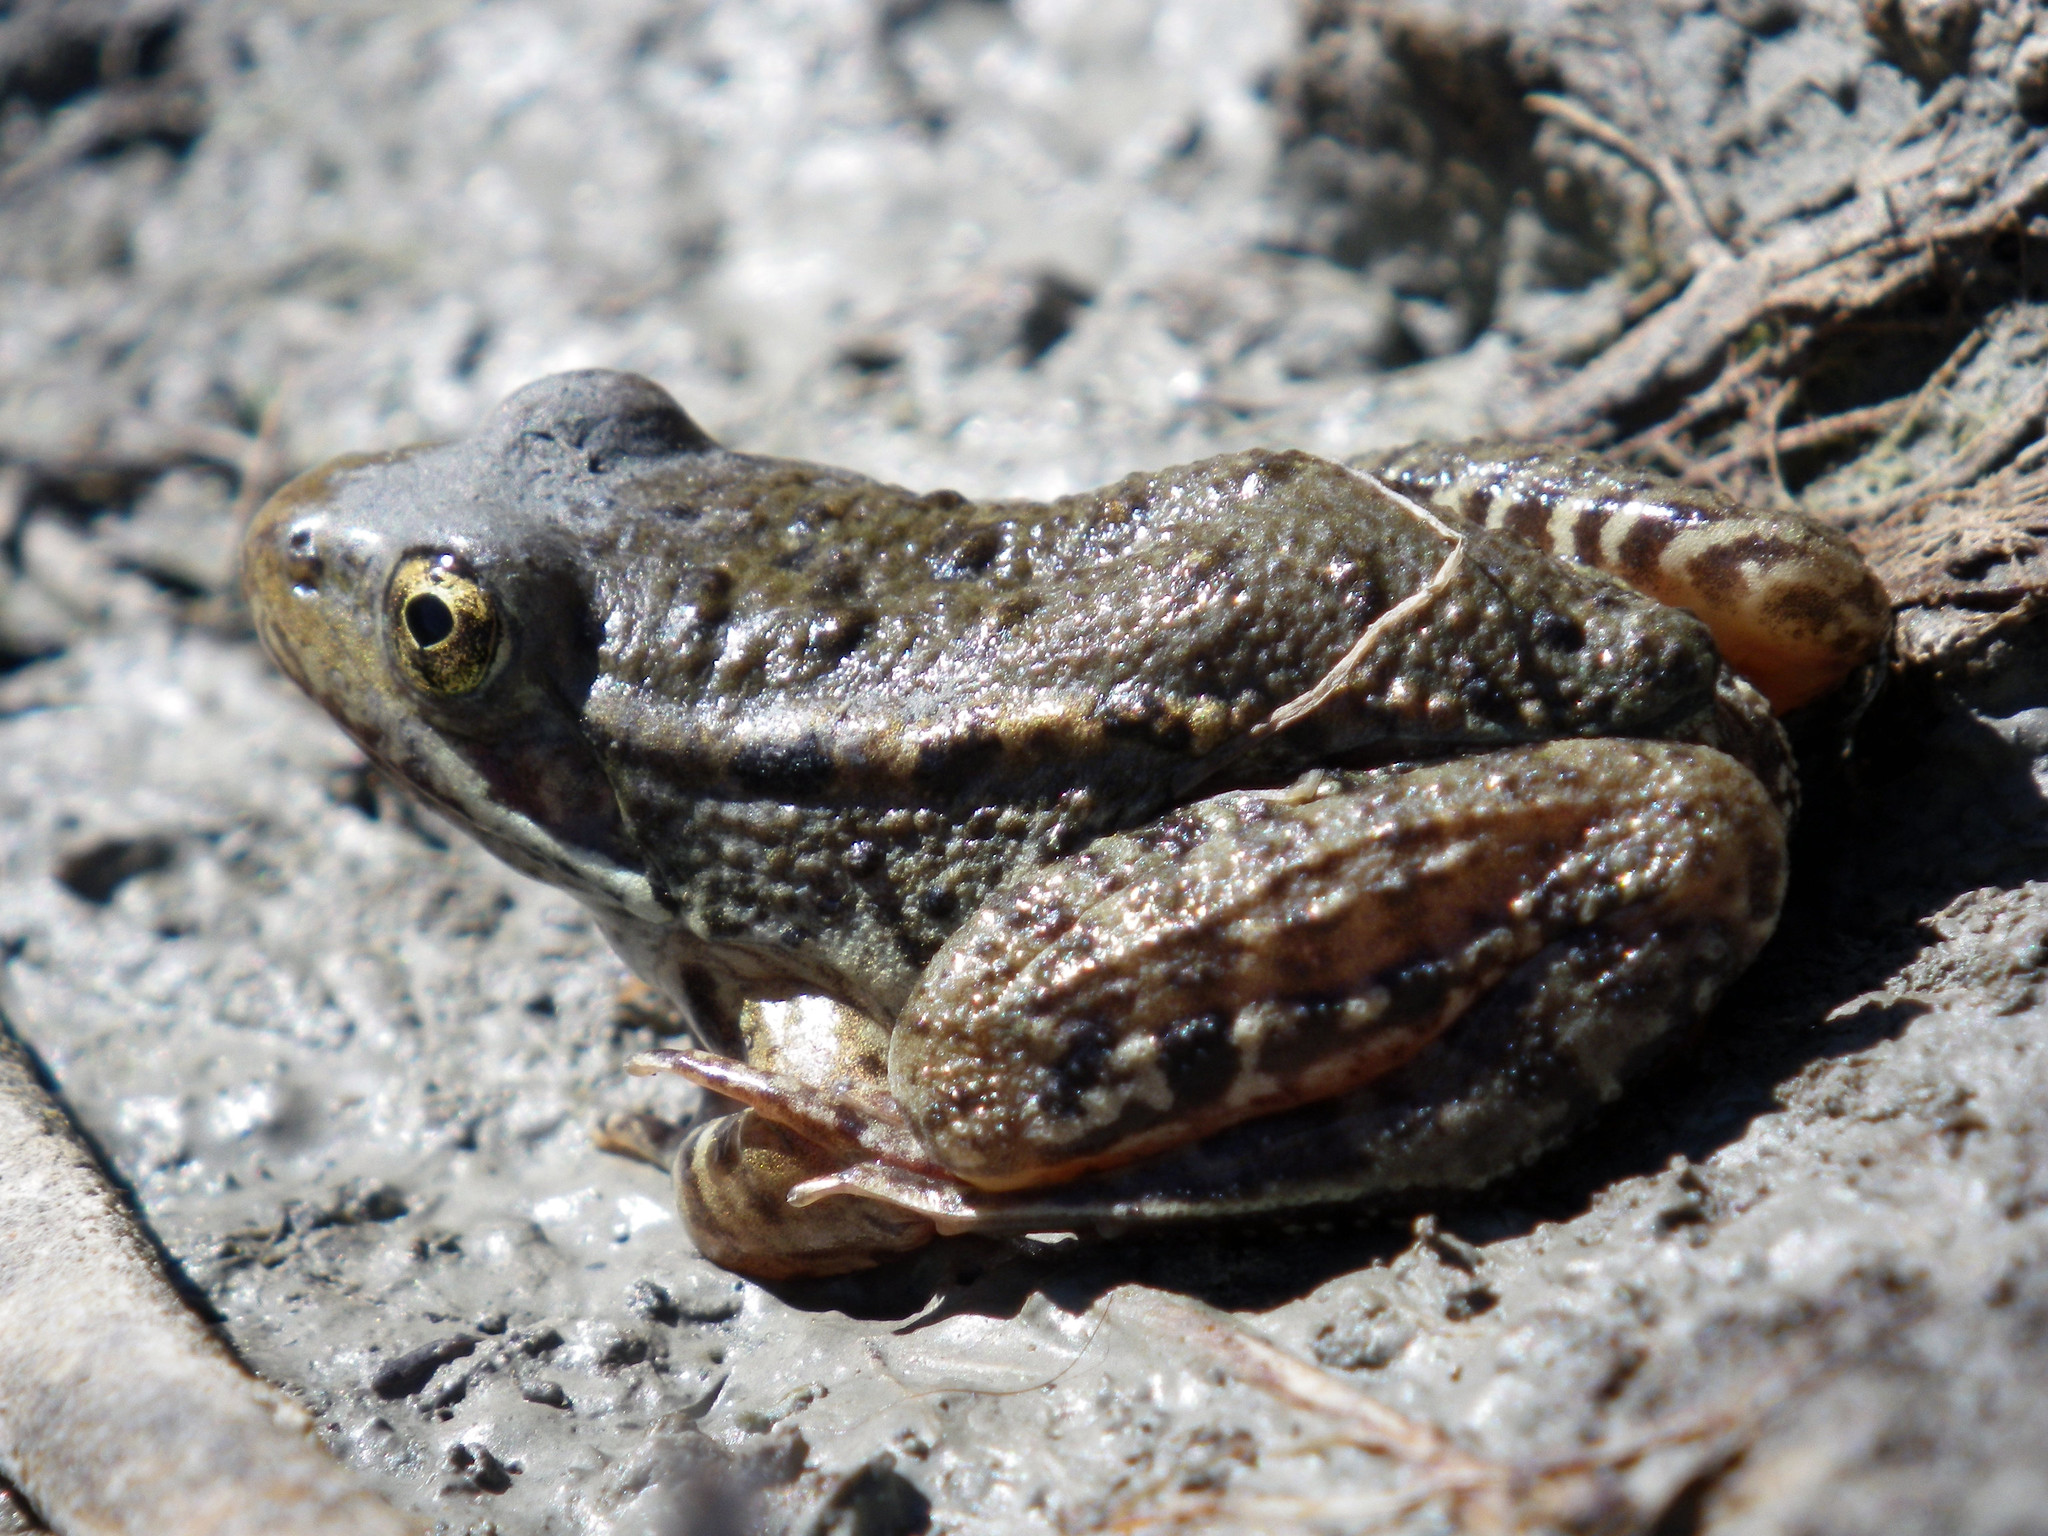 A red legged frog sits facing away from the camera. This is a side view with the frog's back left leg closest to the camera. It is sitting on what appears to be mud.